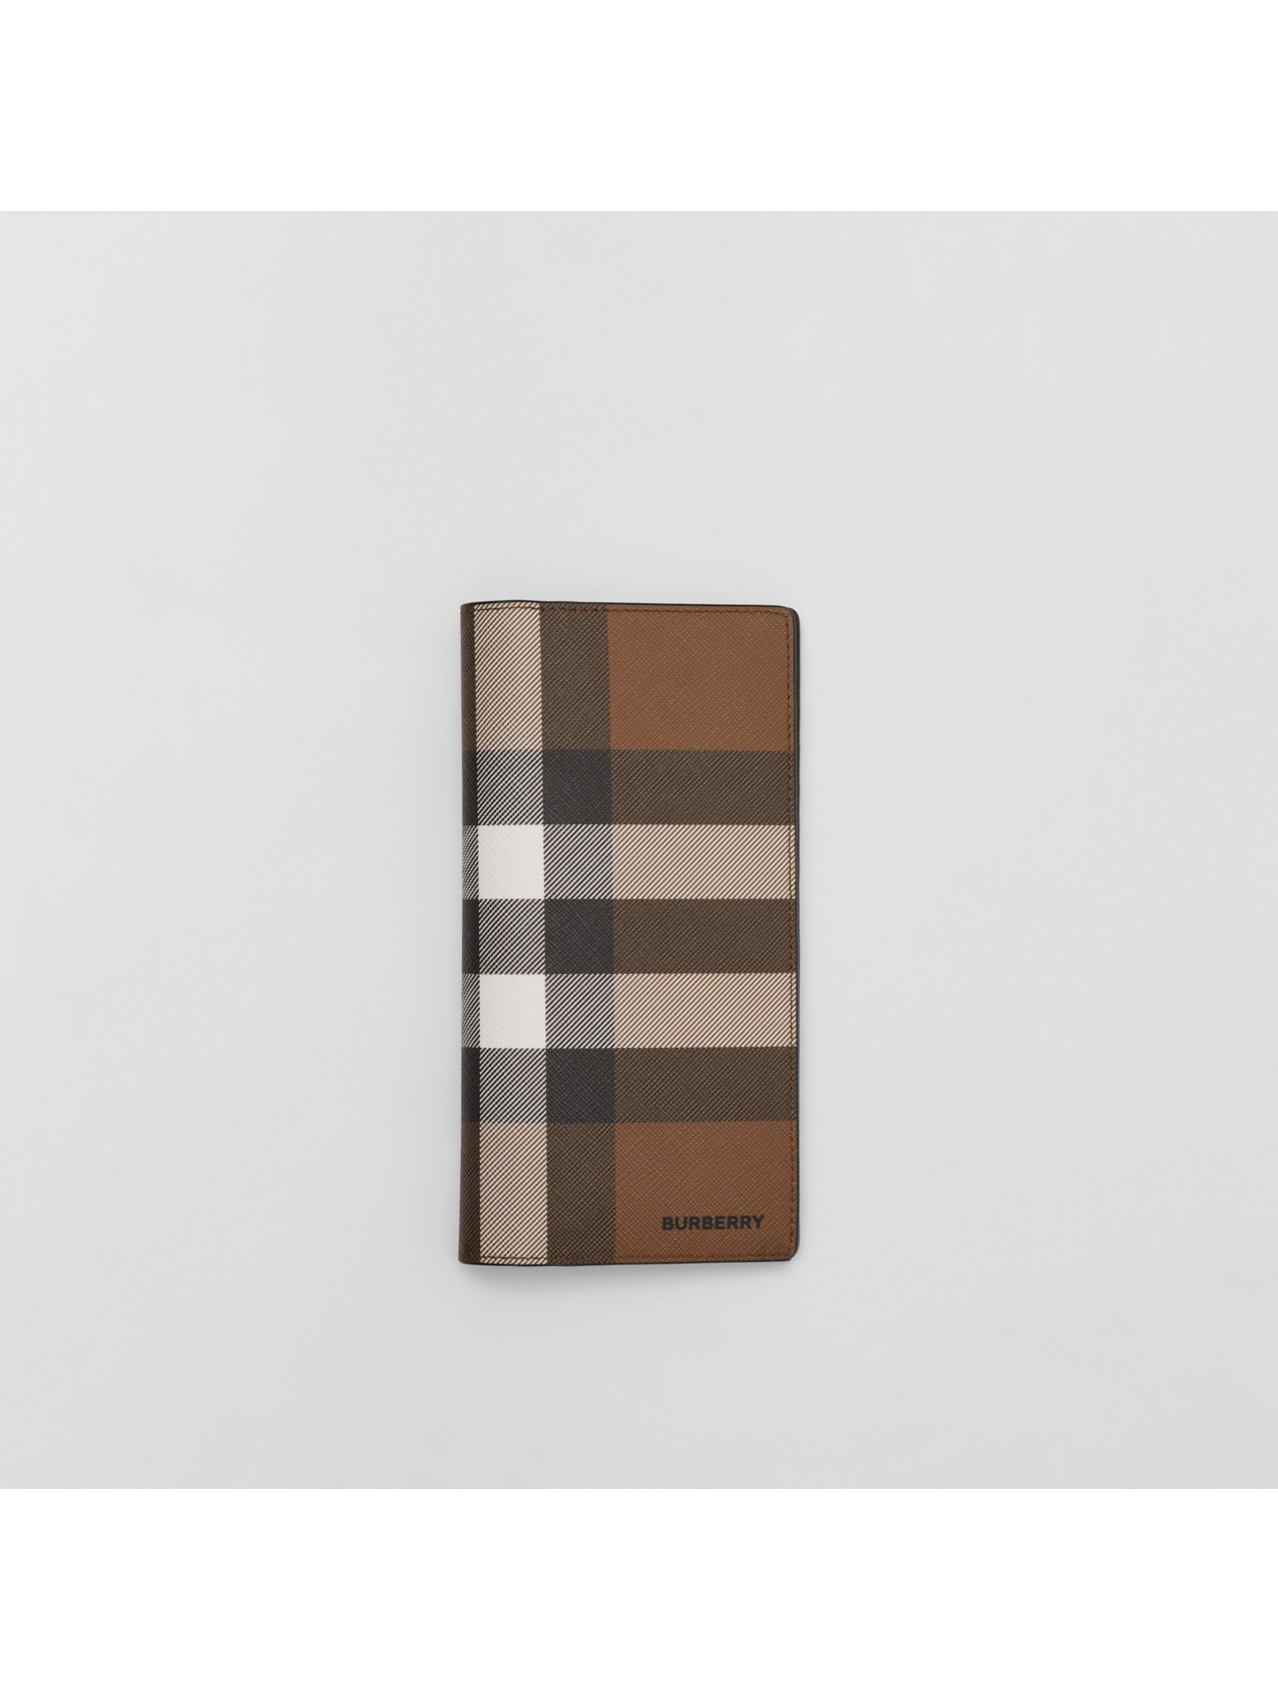 Men's Wallets | Men's Small Leather Goods | Burberry® Official